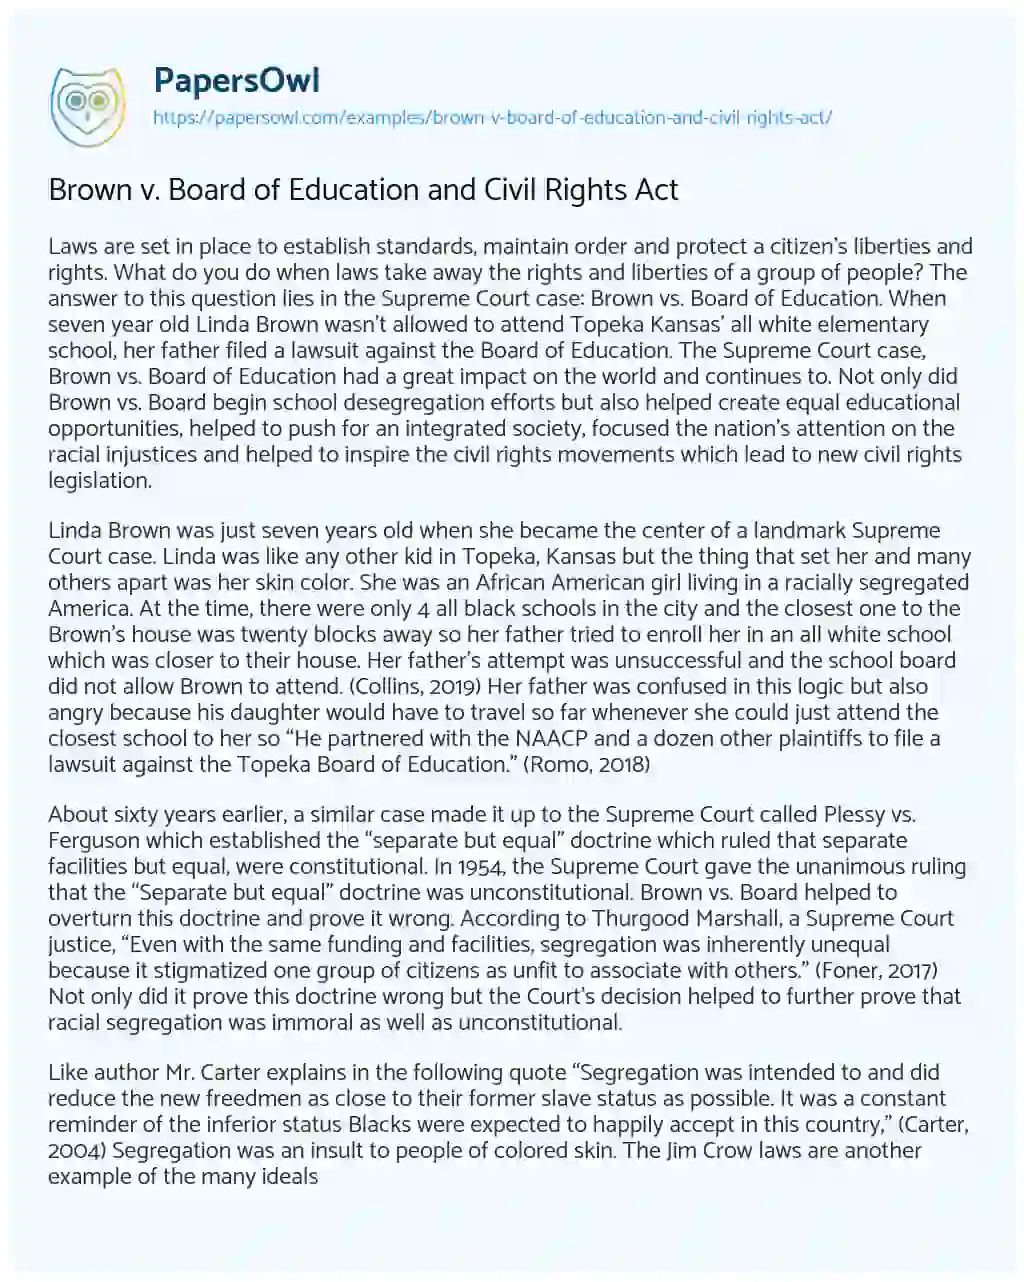 Brown V. Board of Education and Civil Rights Act essay